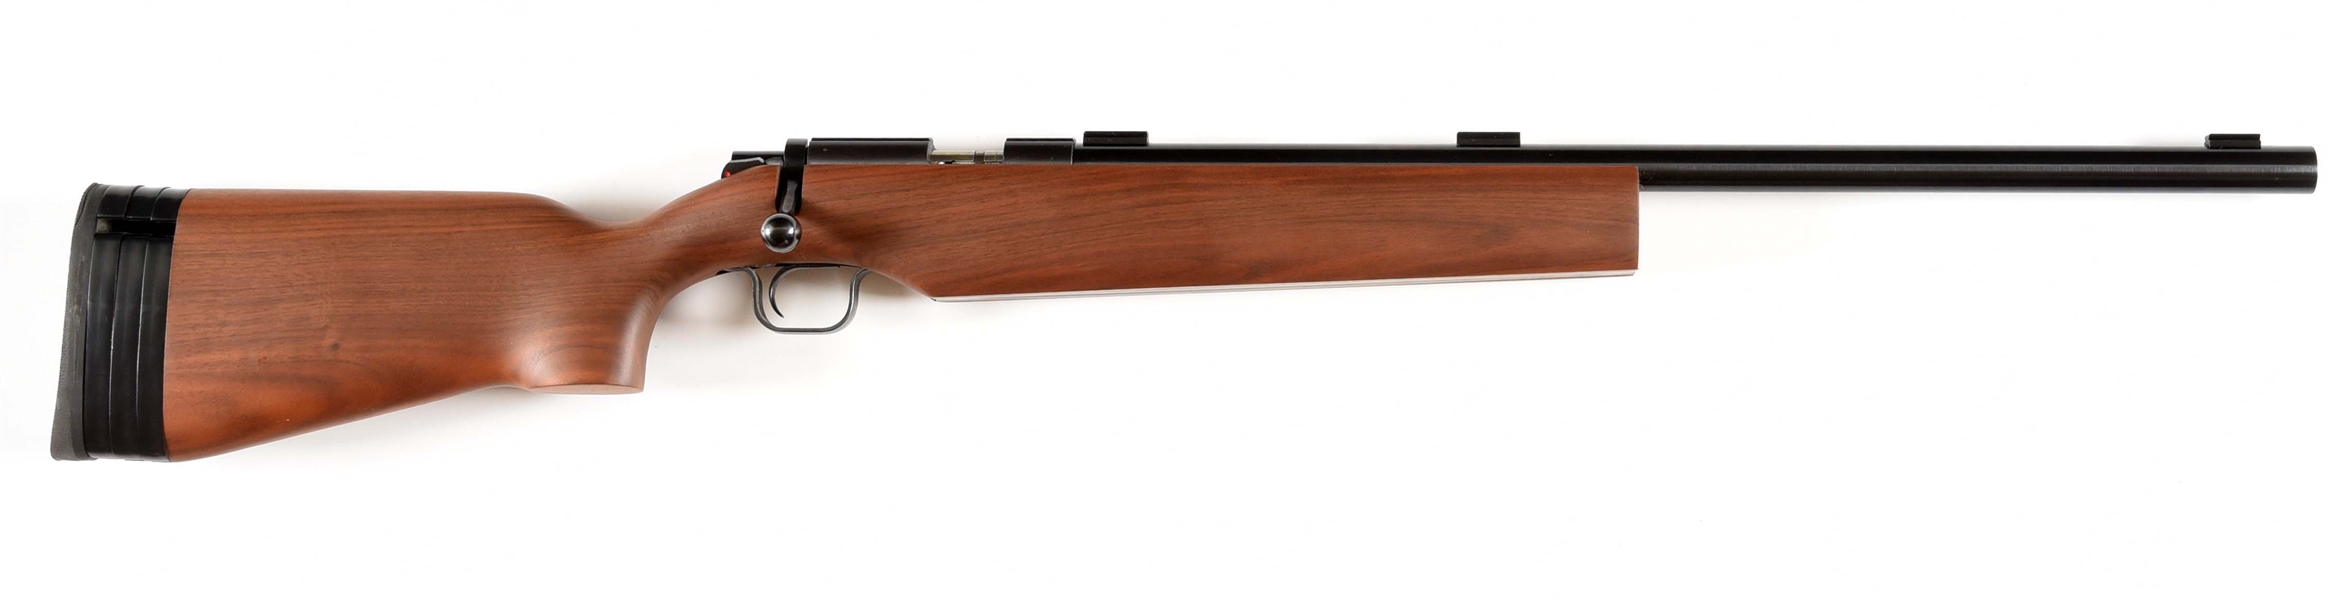 (M) KIMBER MODEL 82 GOVERNMENT BOLT ACTION RIFLE 